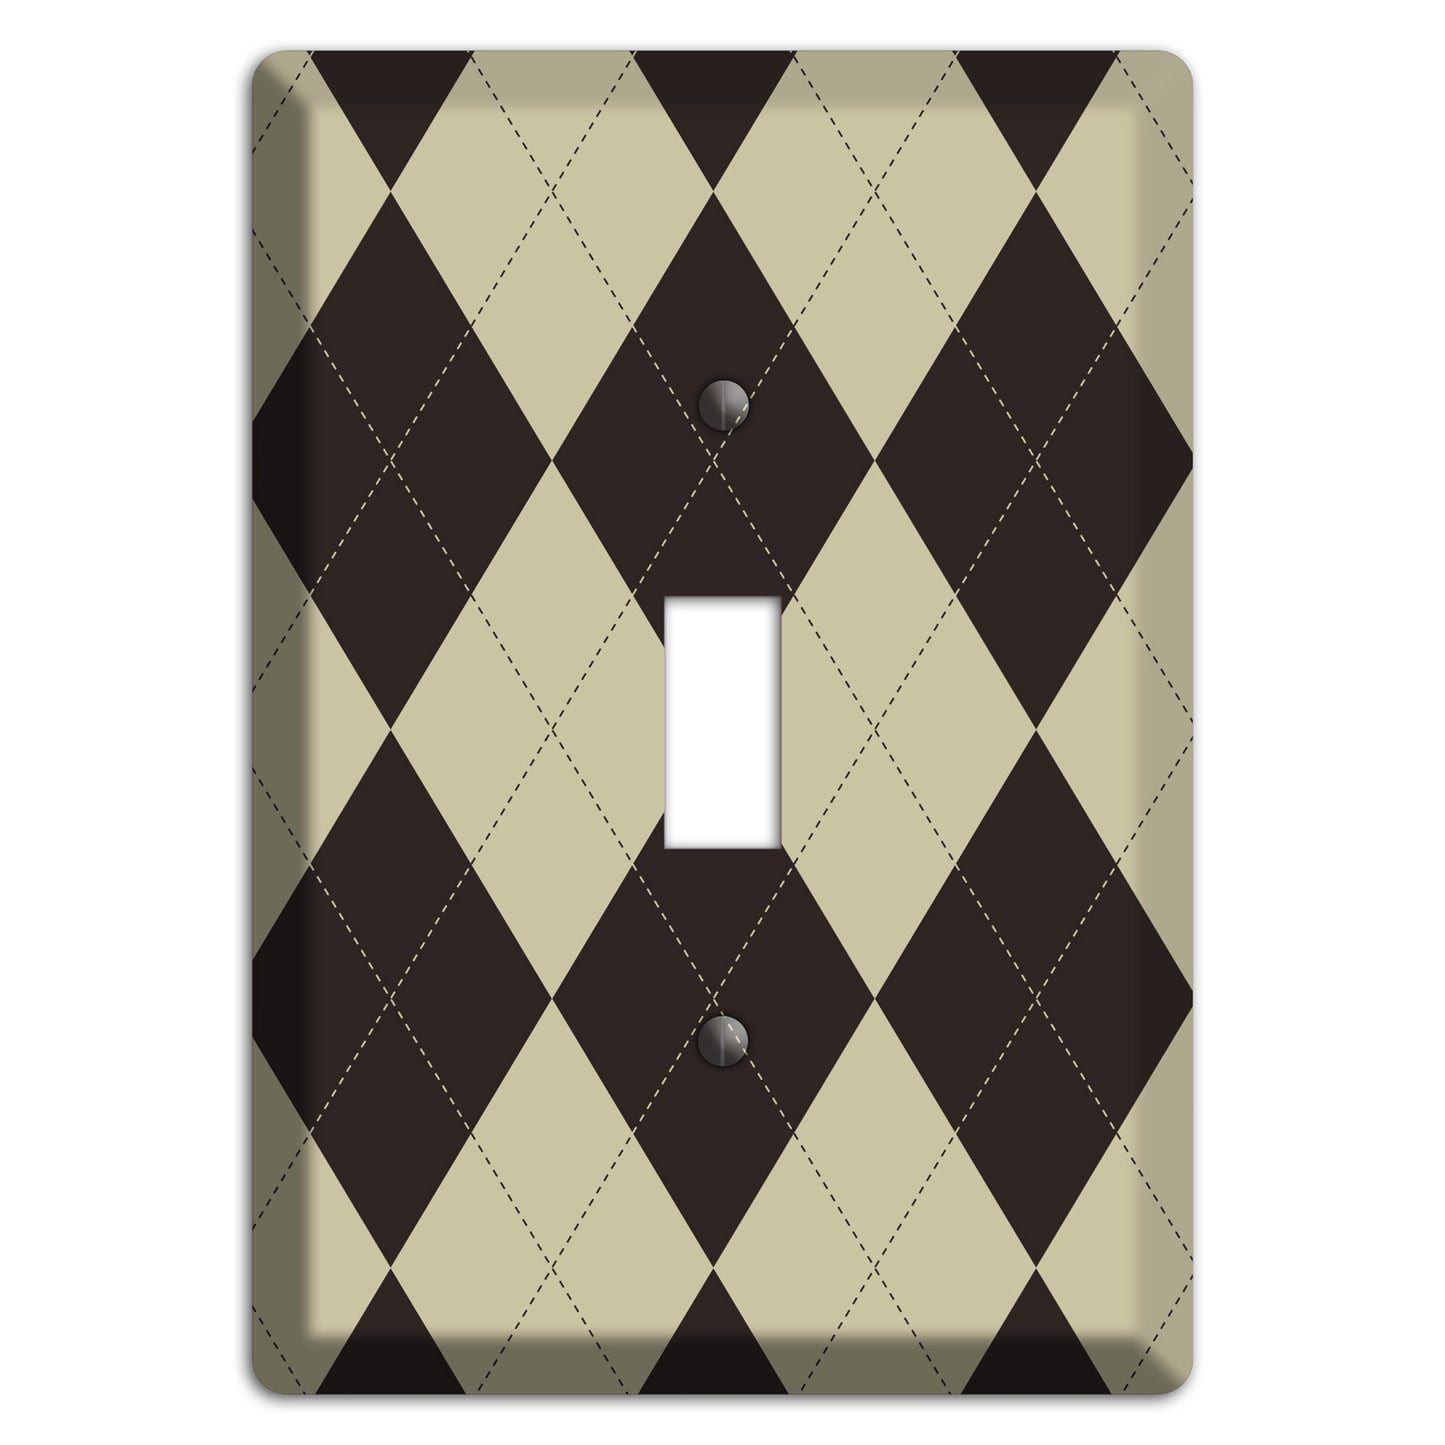 Beige and Black Argyle Cover Plates